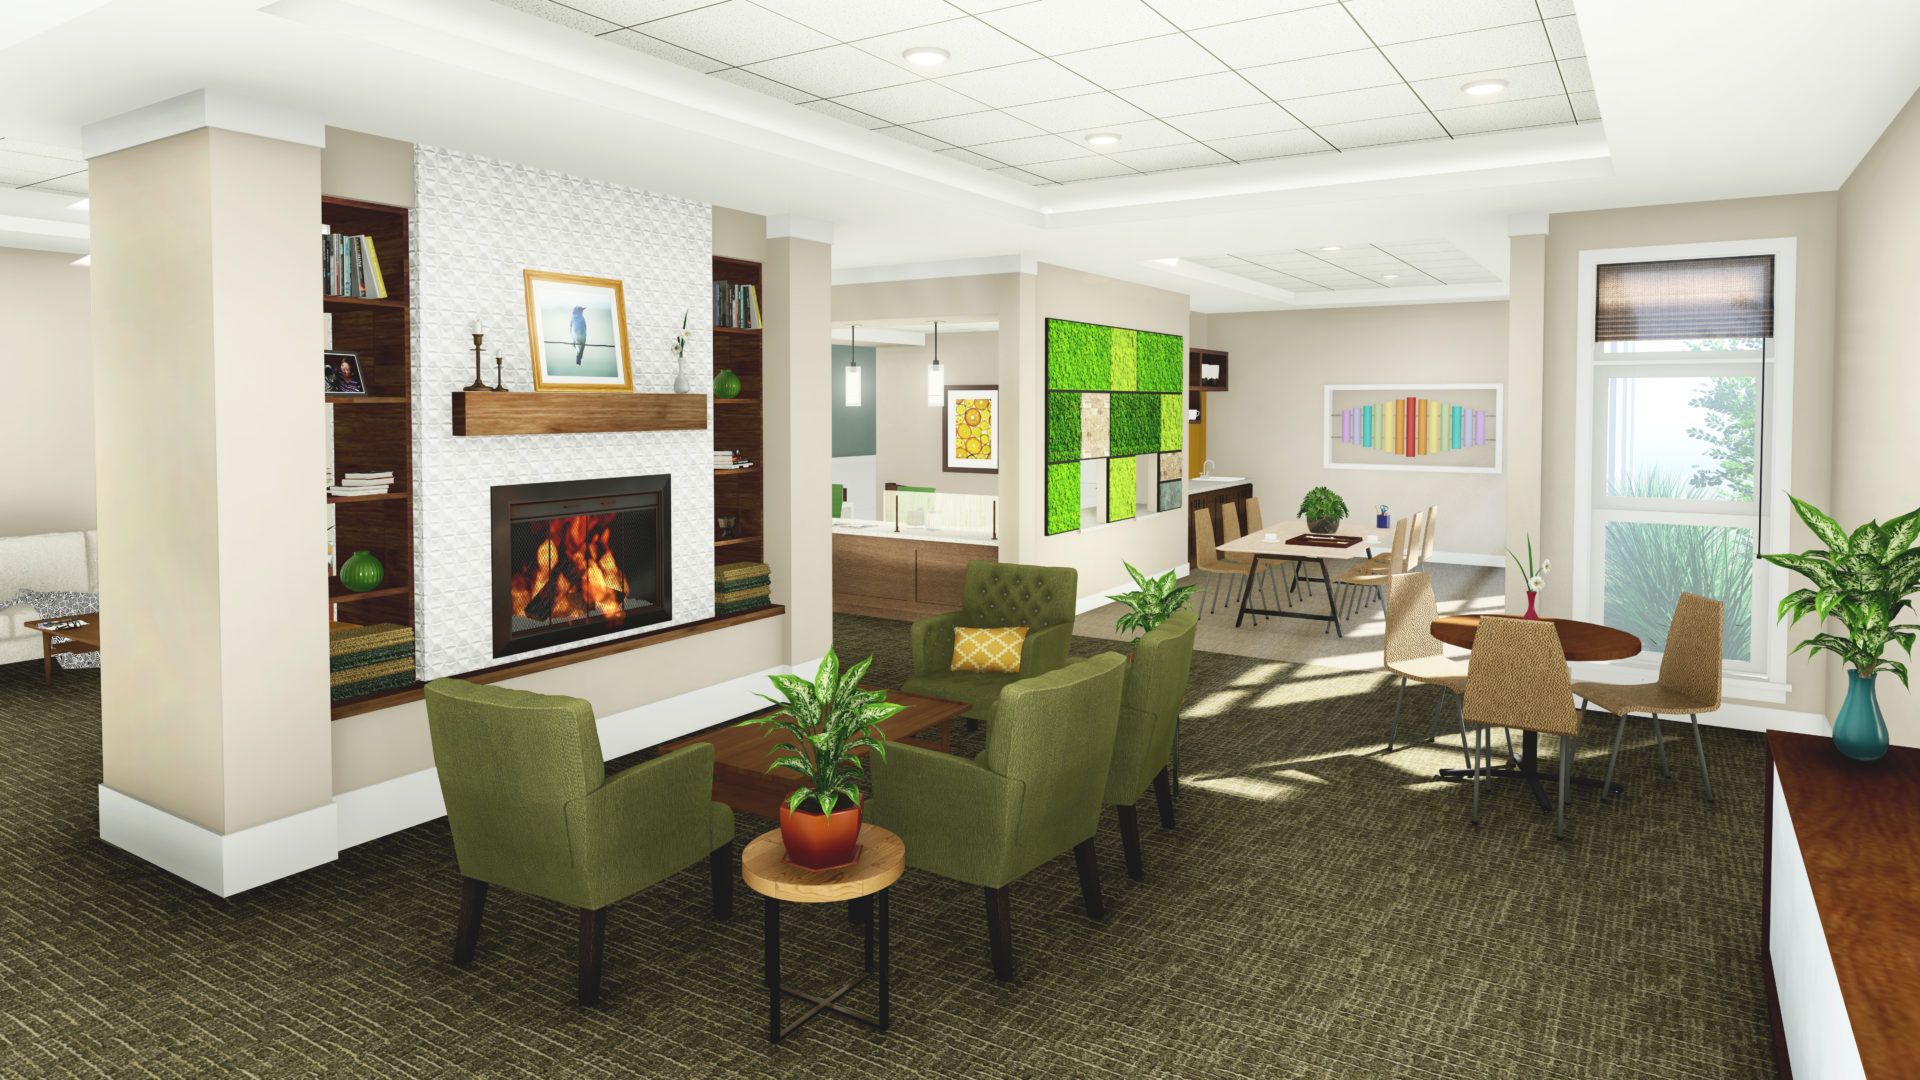 Interior view of Tiffany Springs Senior Living with elegant decor, fireplace, and dining area.